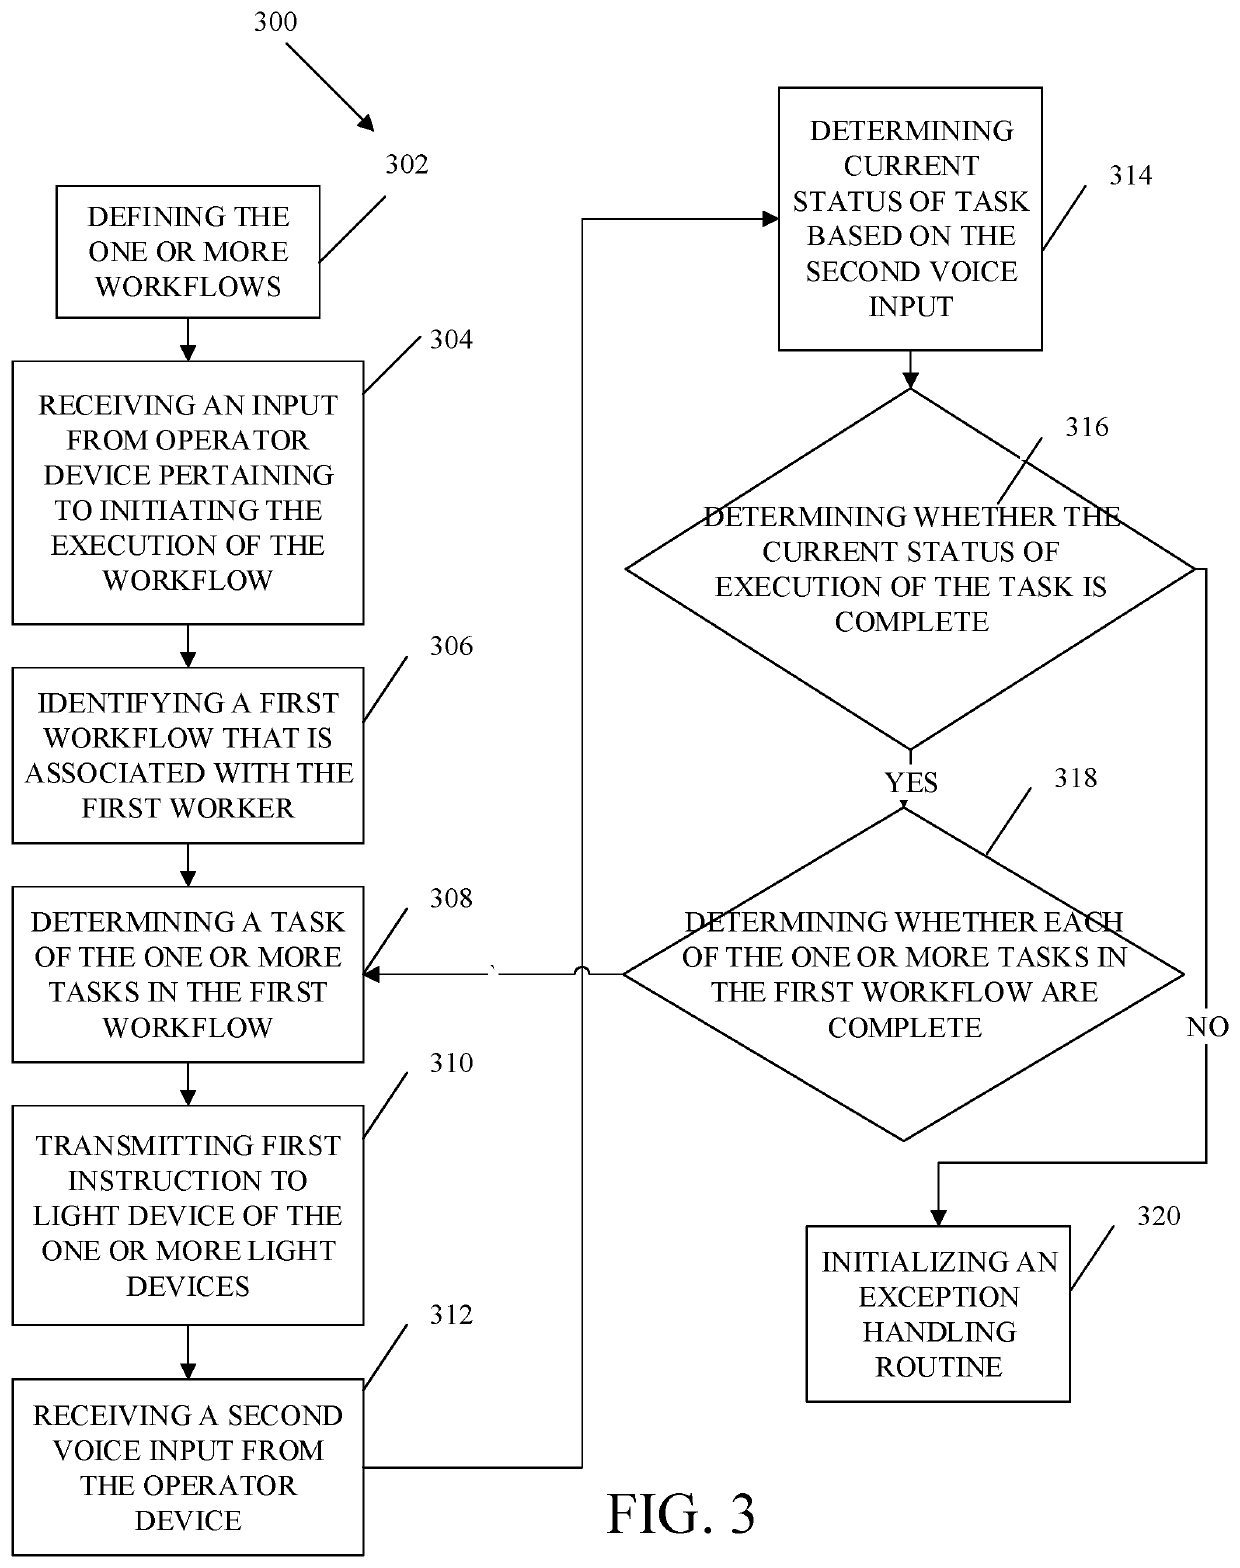 Methods and systems for task execution in a workplace